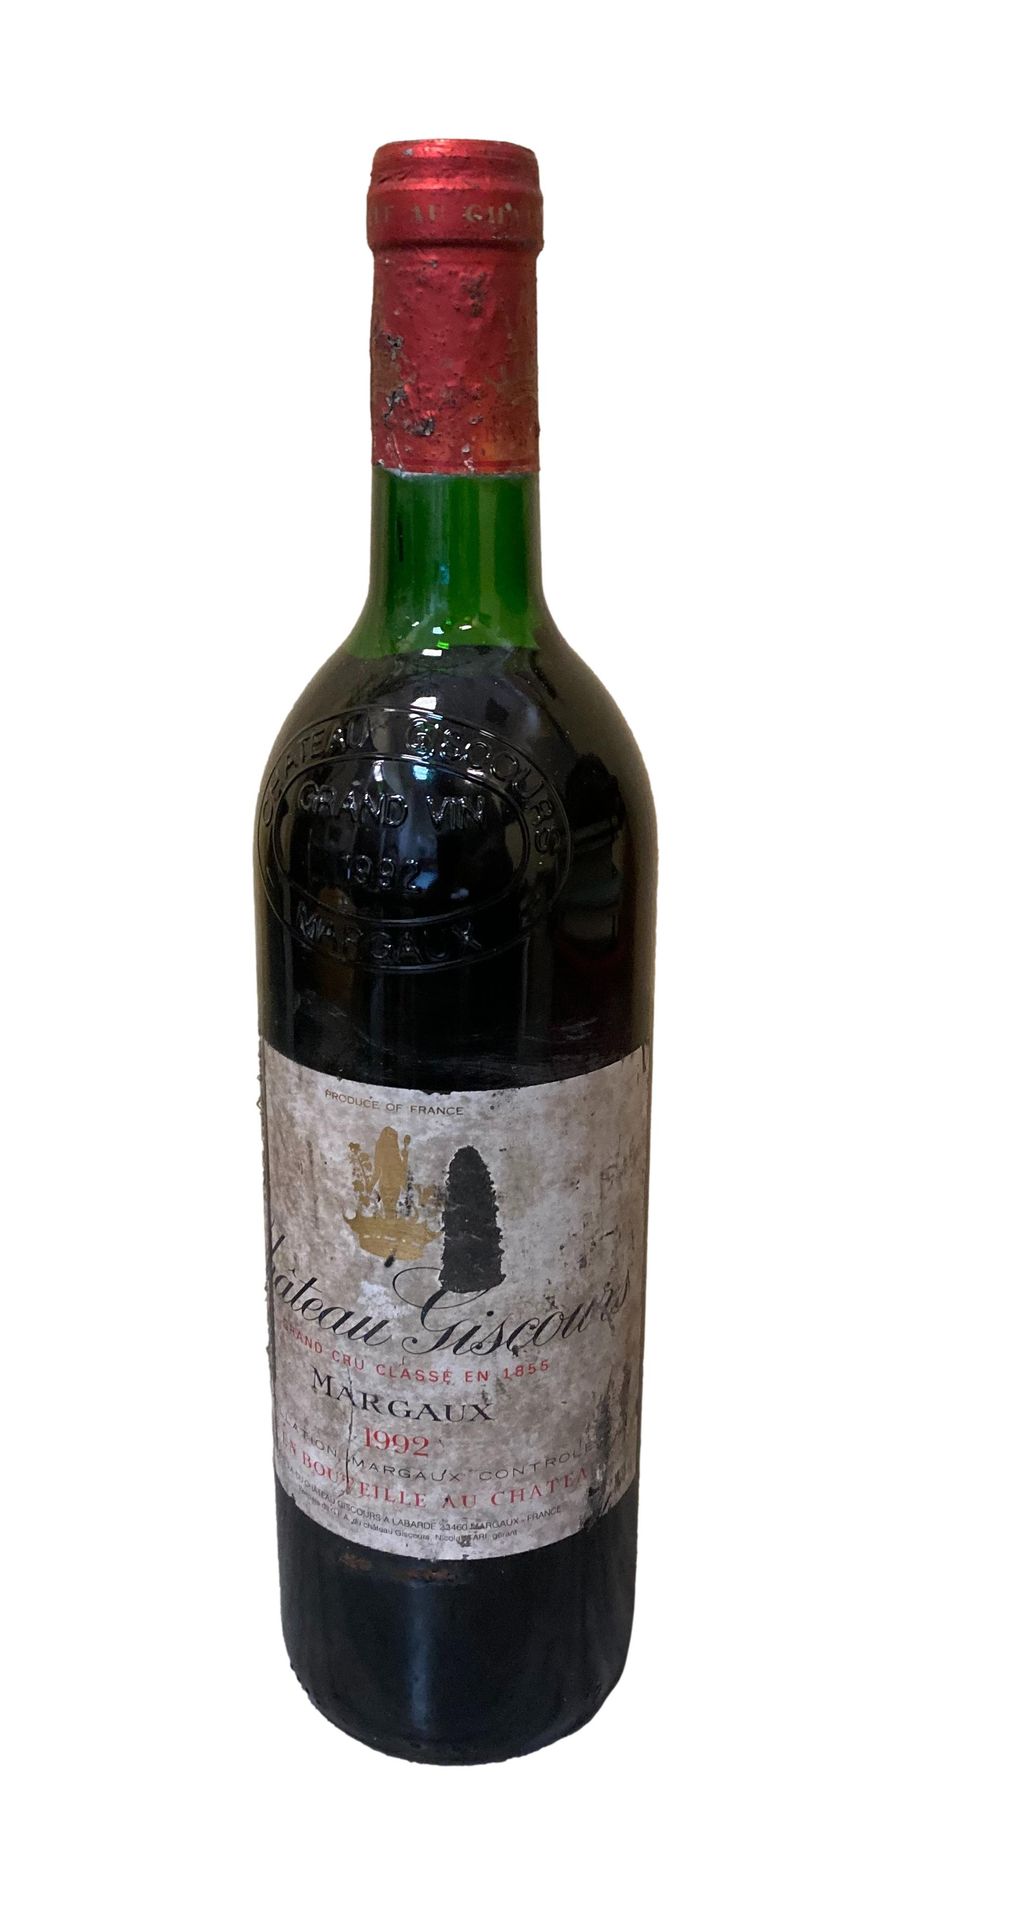 Null CHÂTEAU GISCOURS Margaux 1992
1 botella